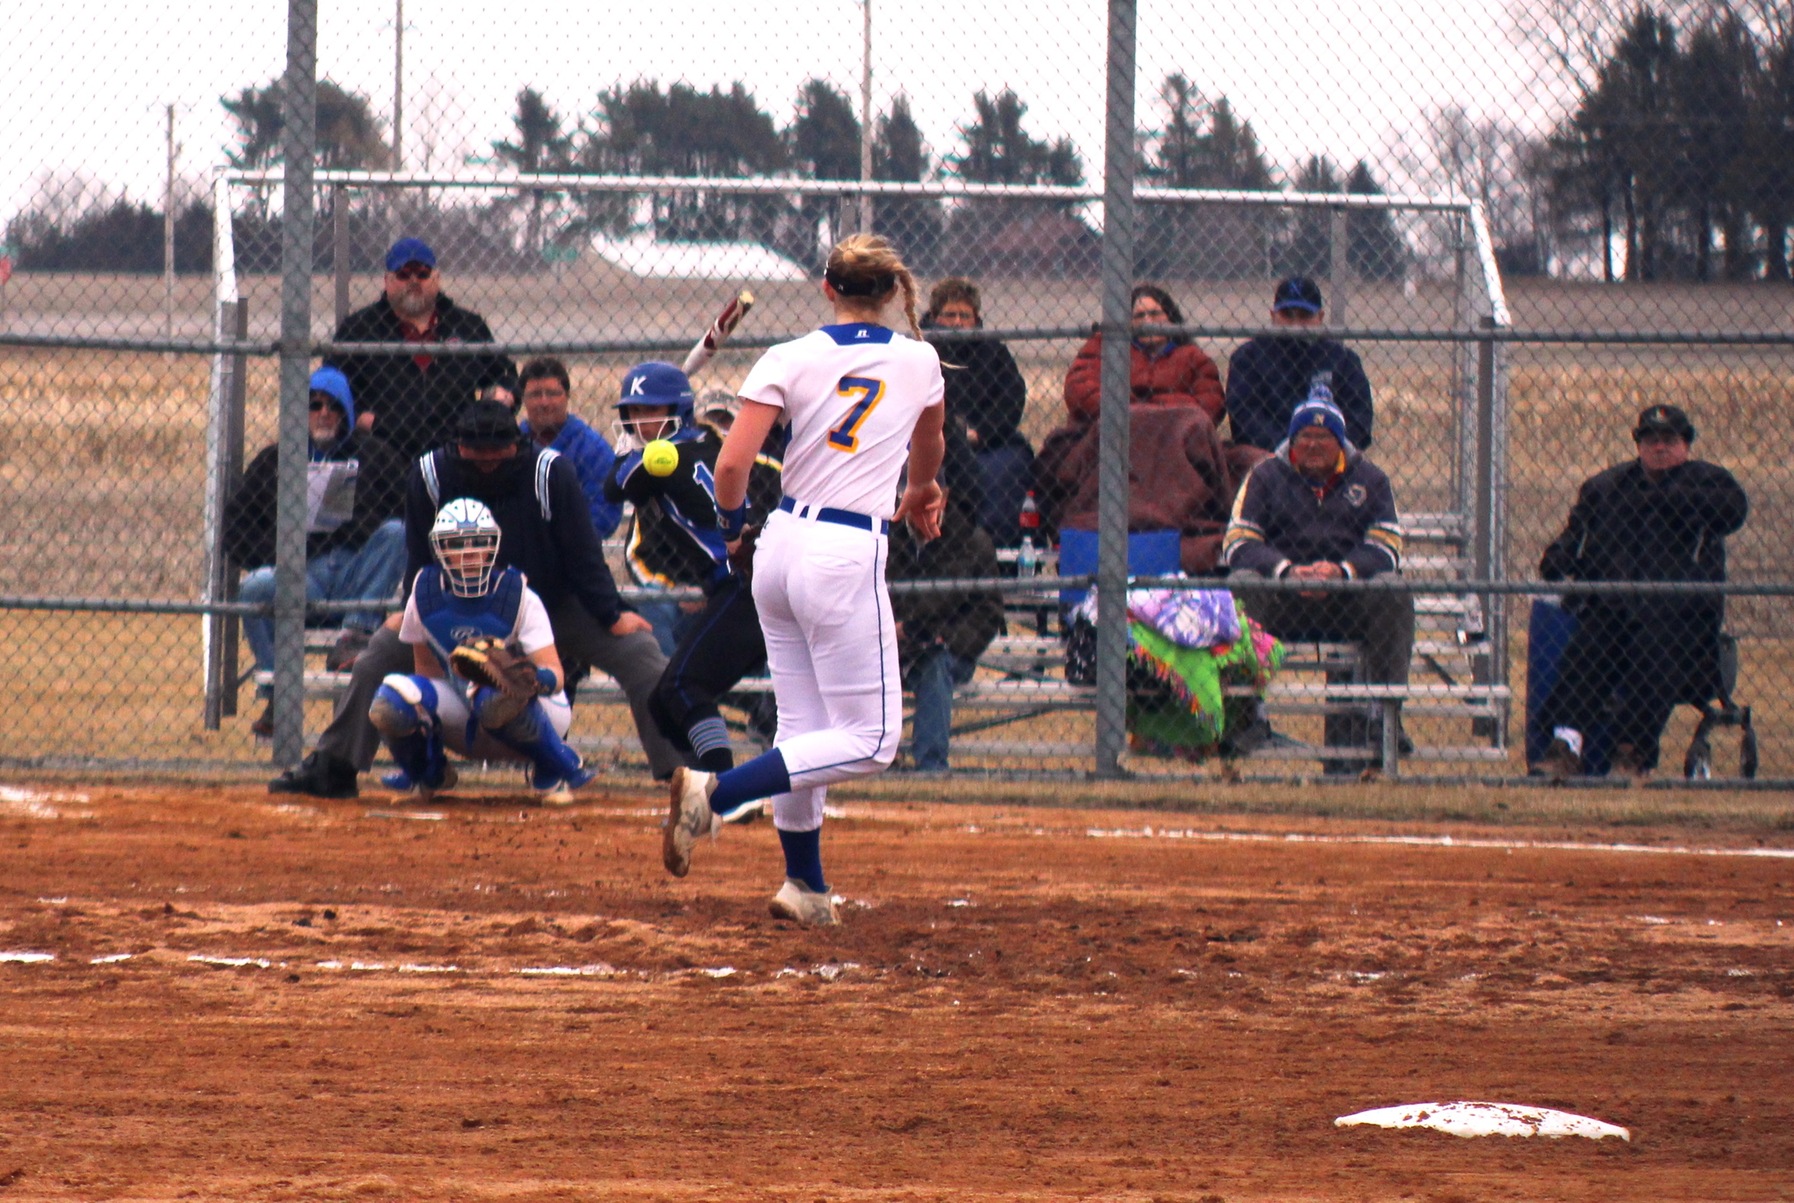 NIACC's Kristen Peka delivers a pitch in Wednesday's doubleheader against Kirkwood. Photo by NIACC's Leo Driscoll.